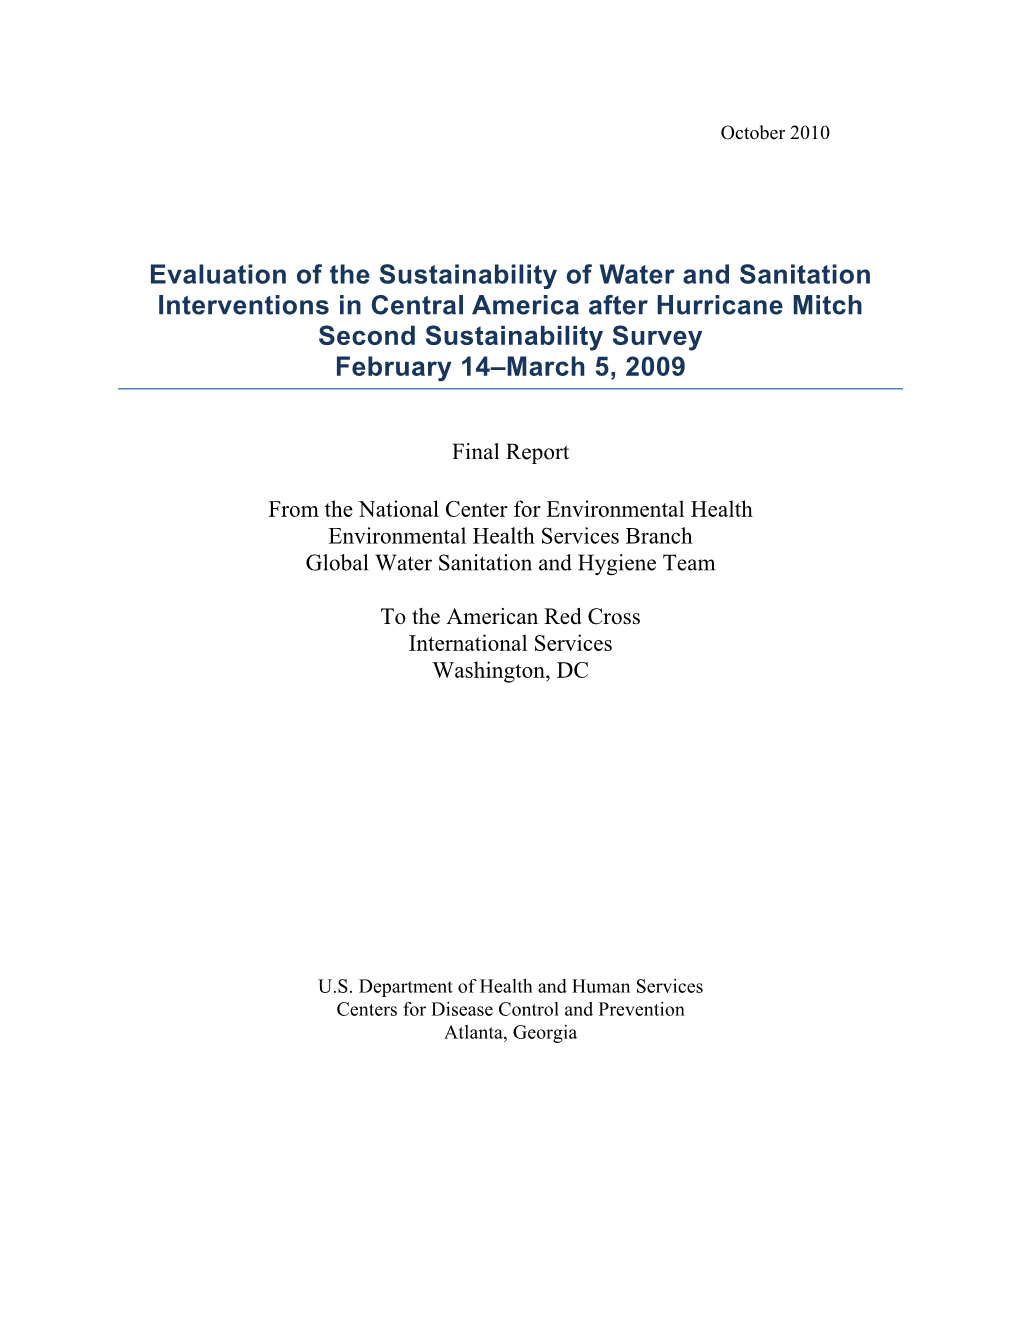 Evaluation of the Sustainability of Water and Sanitation Interventions